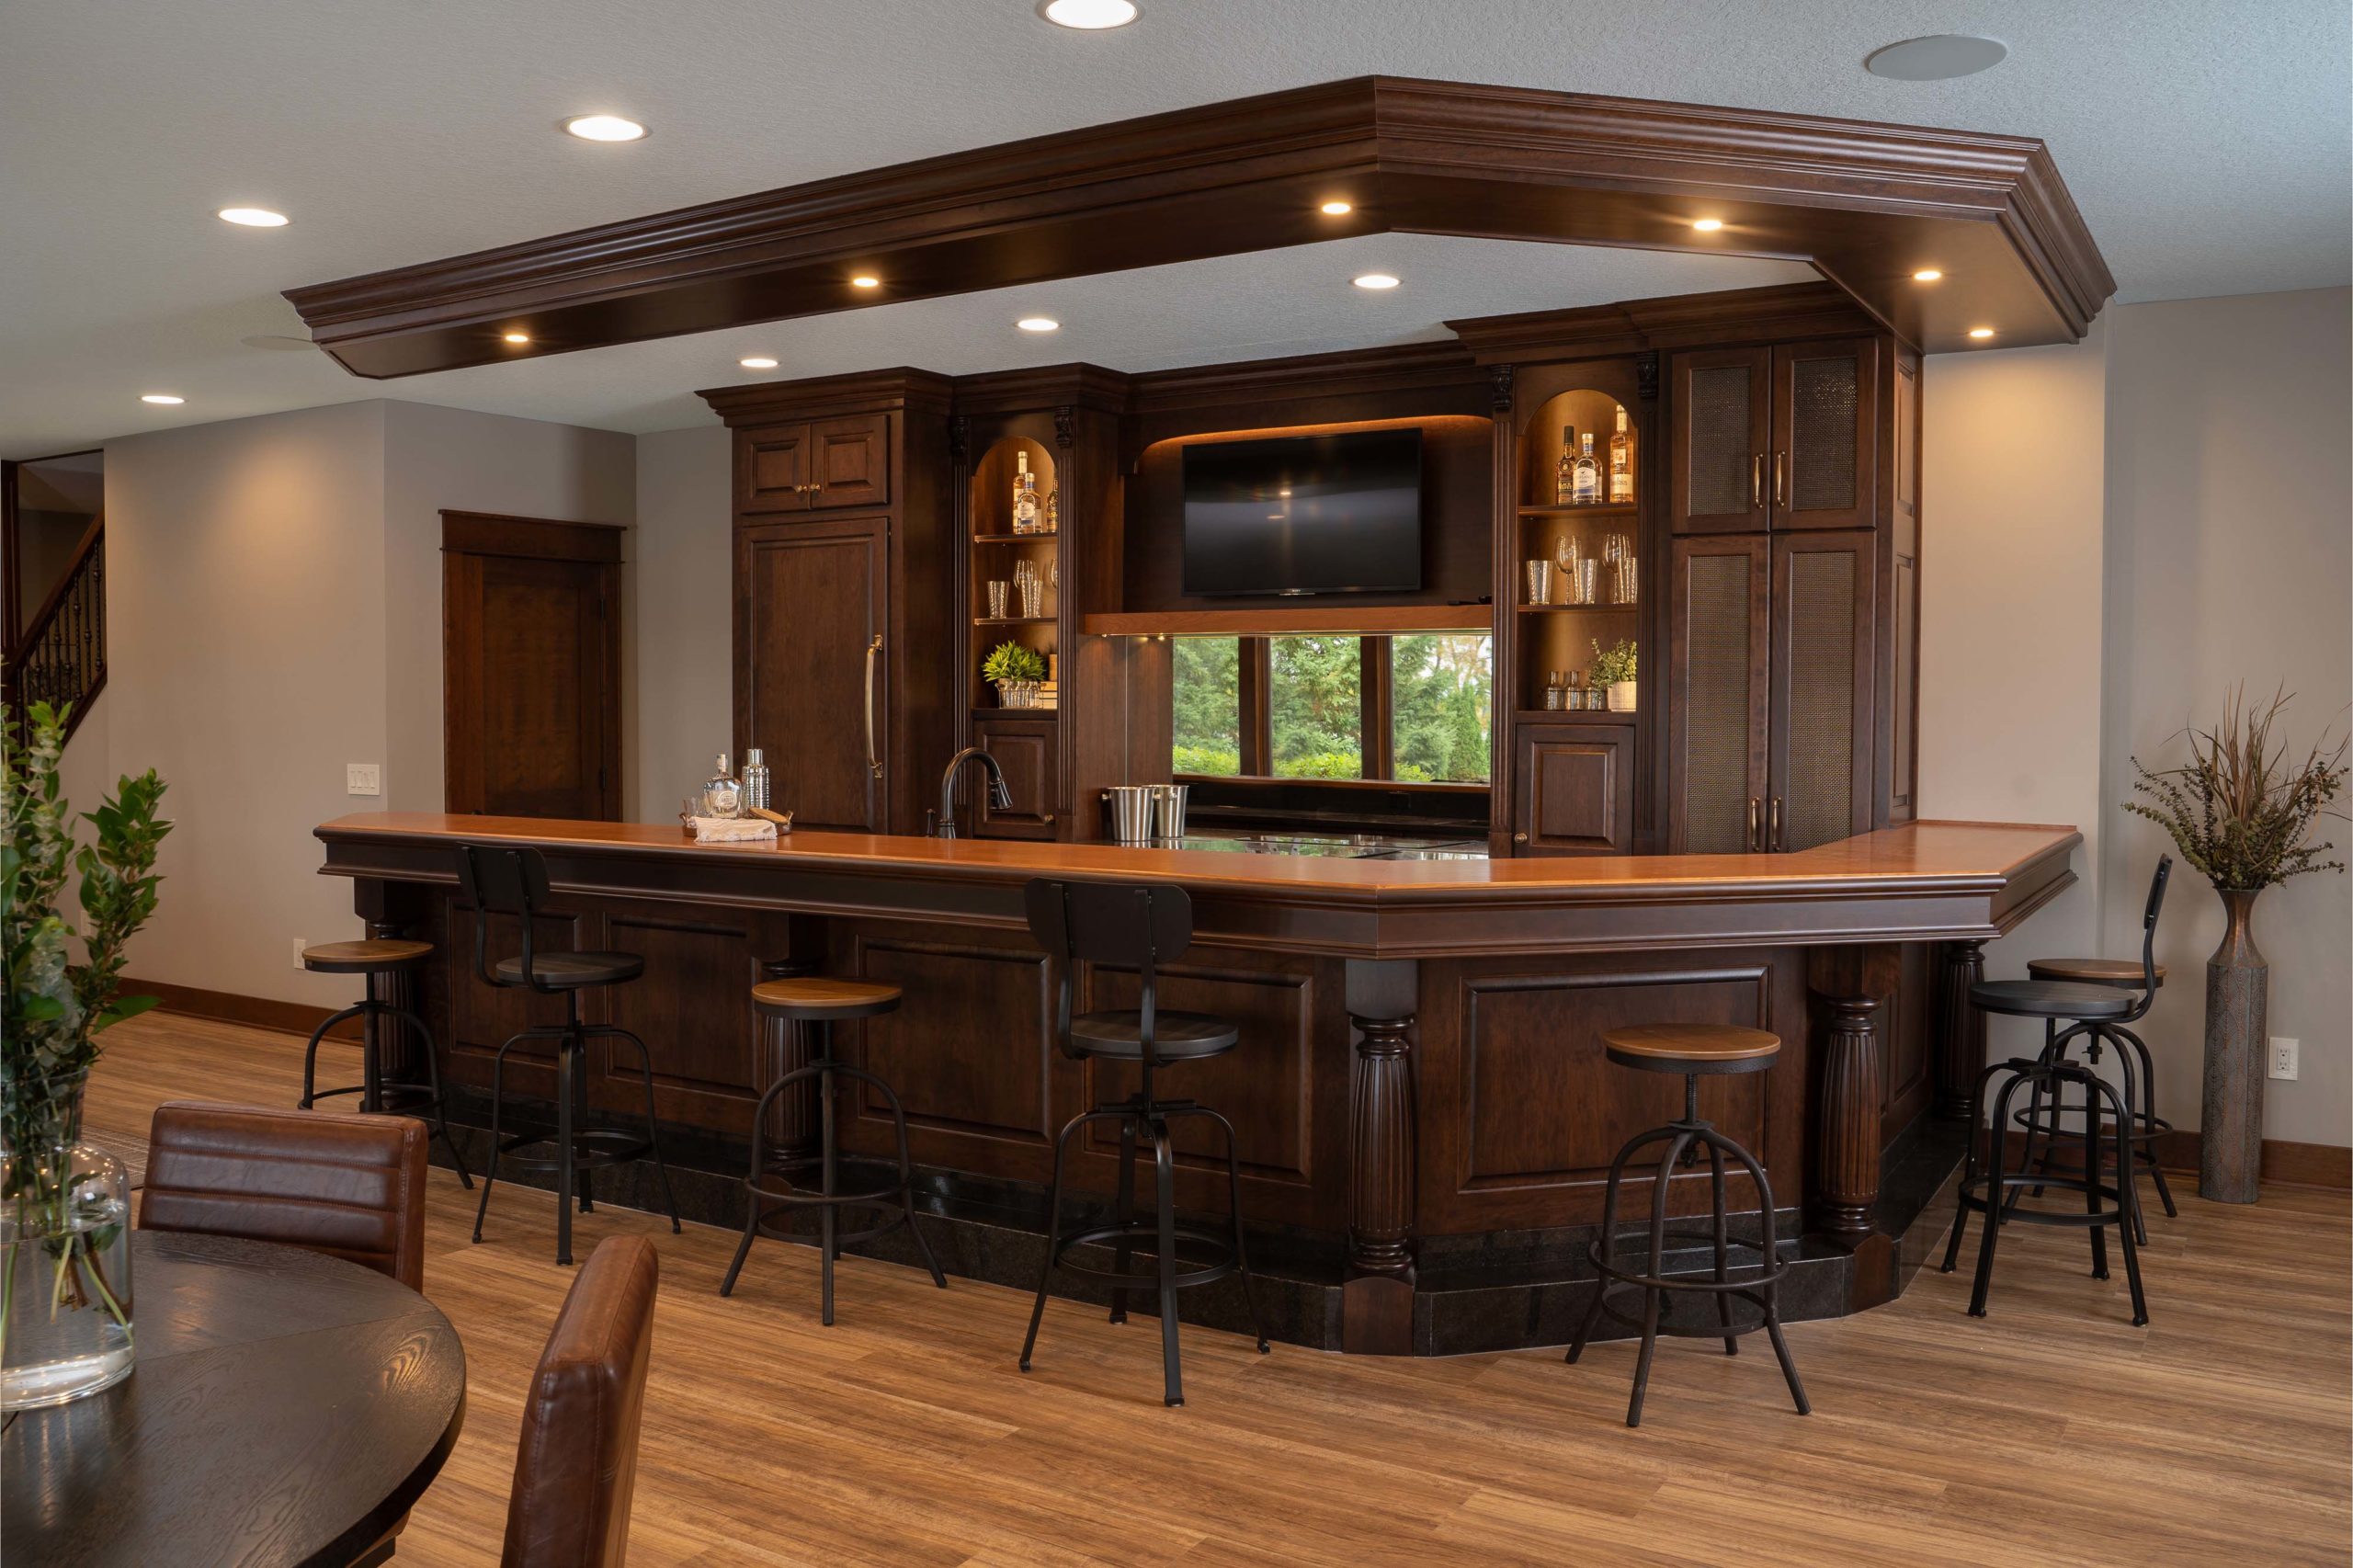 A large kitchen with a bar and stools.